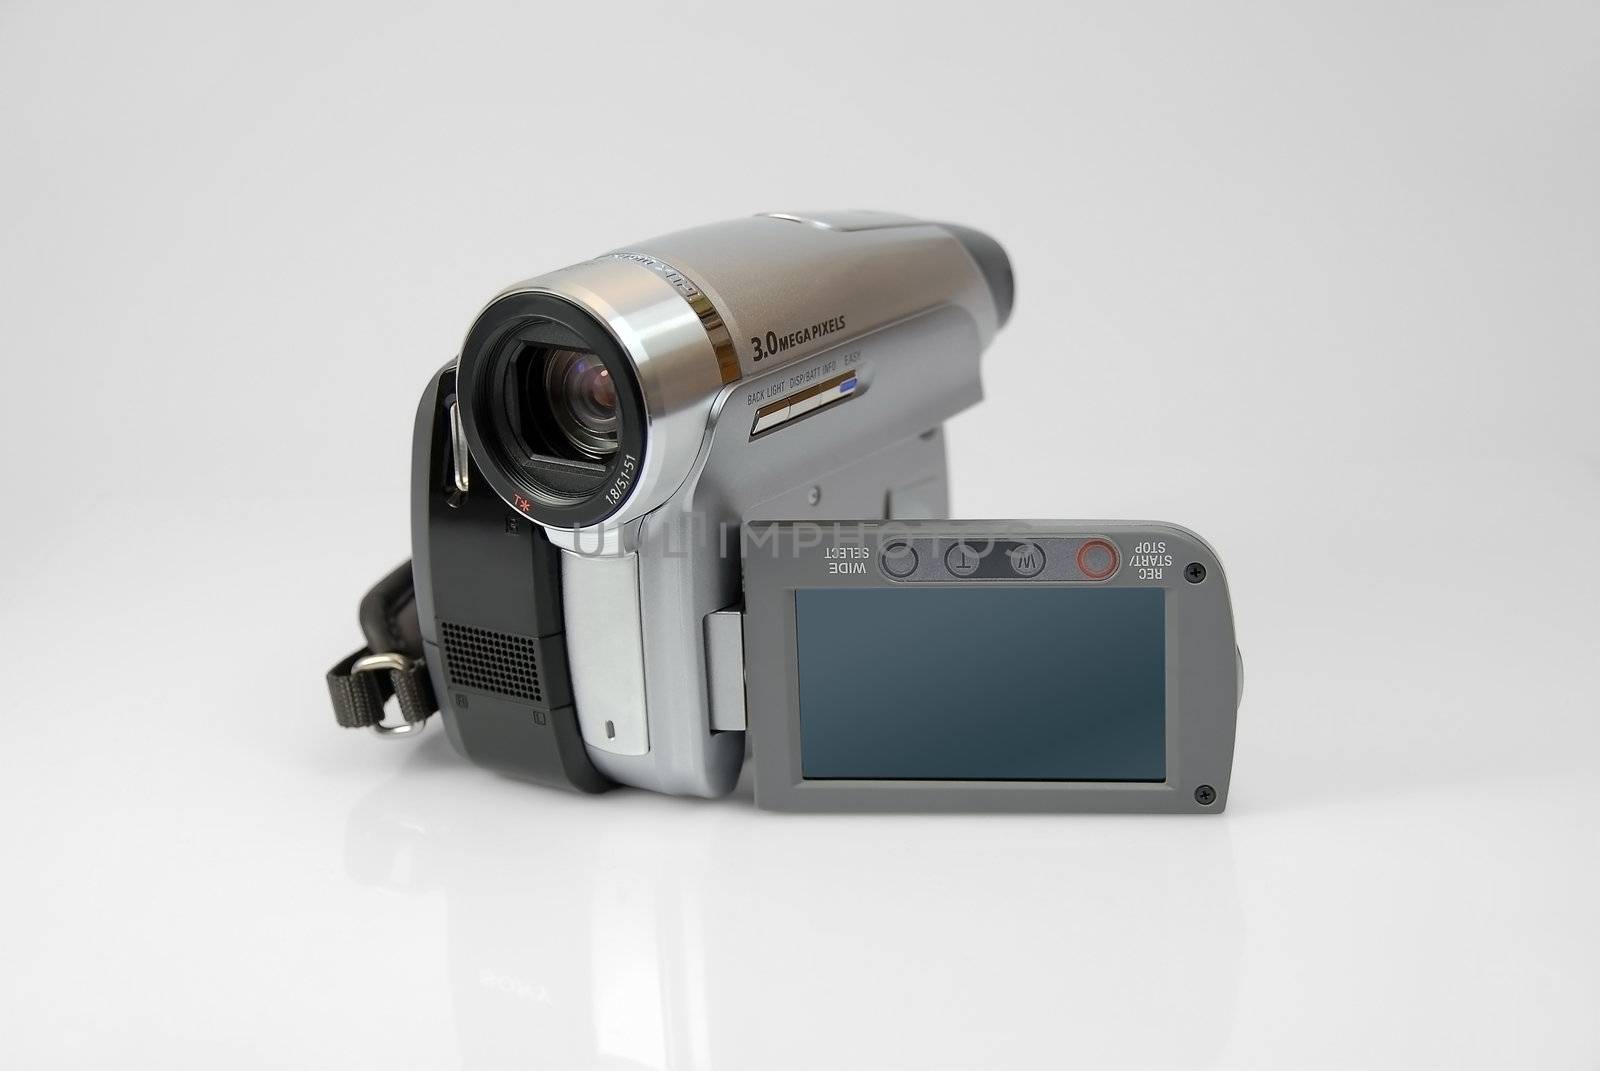 camcorder by anki21